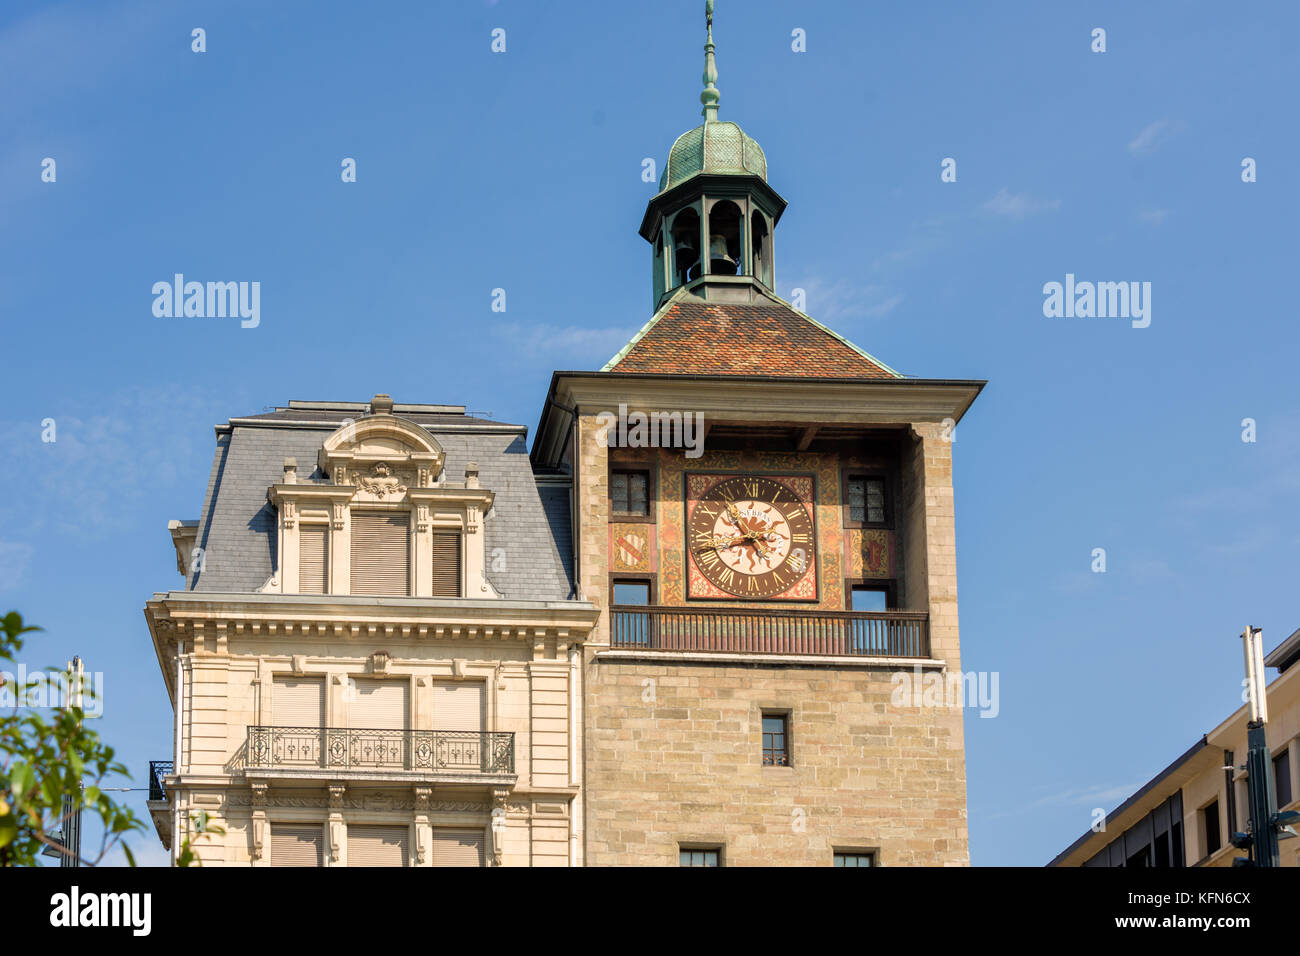 GENEVA, SWITZERLAND - AUGUST 29. Square Belair, the tower has become one of the key monuments of the city's heritage Stock Photo